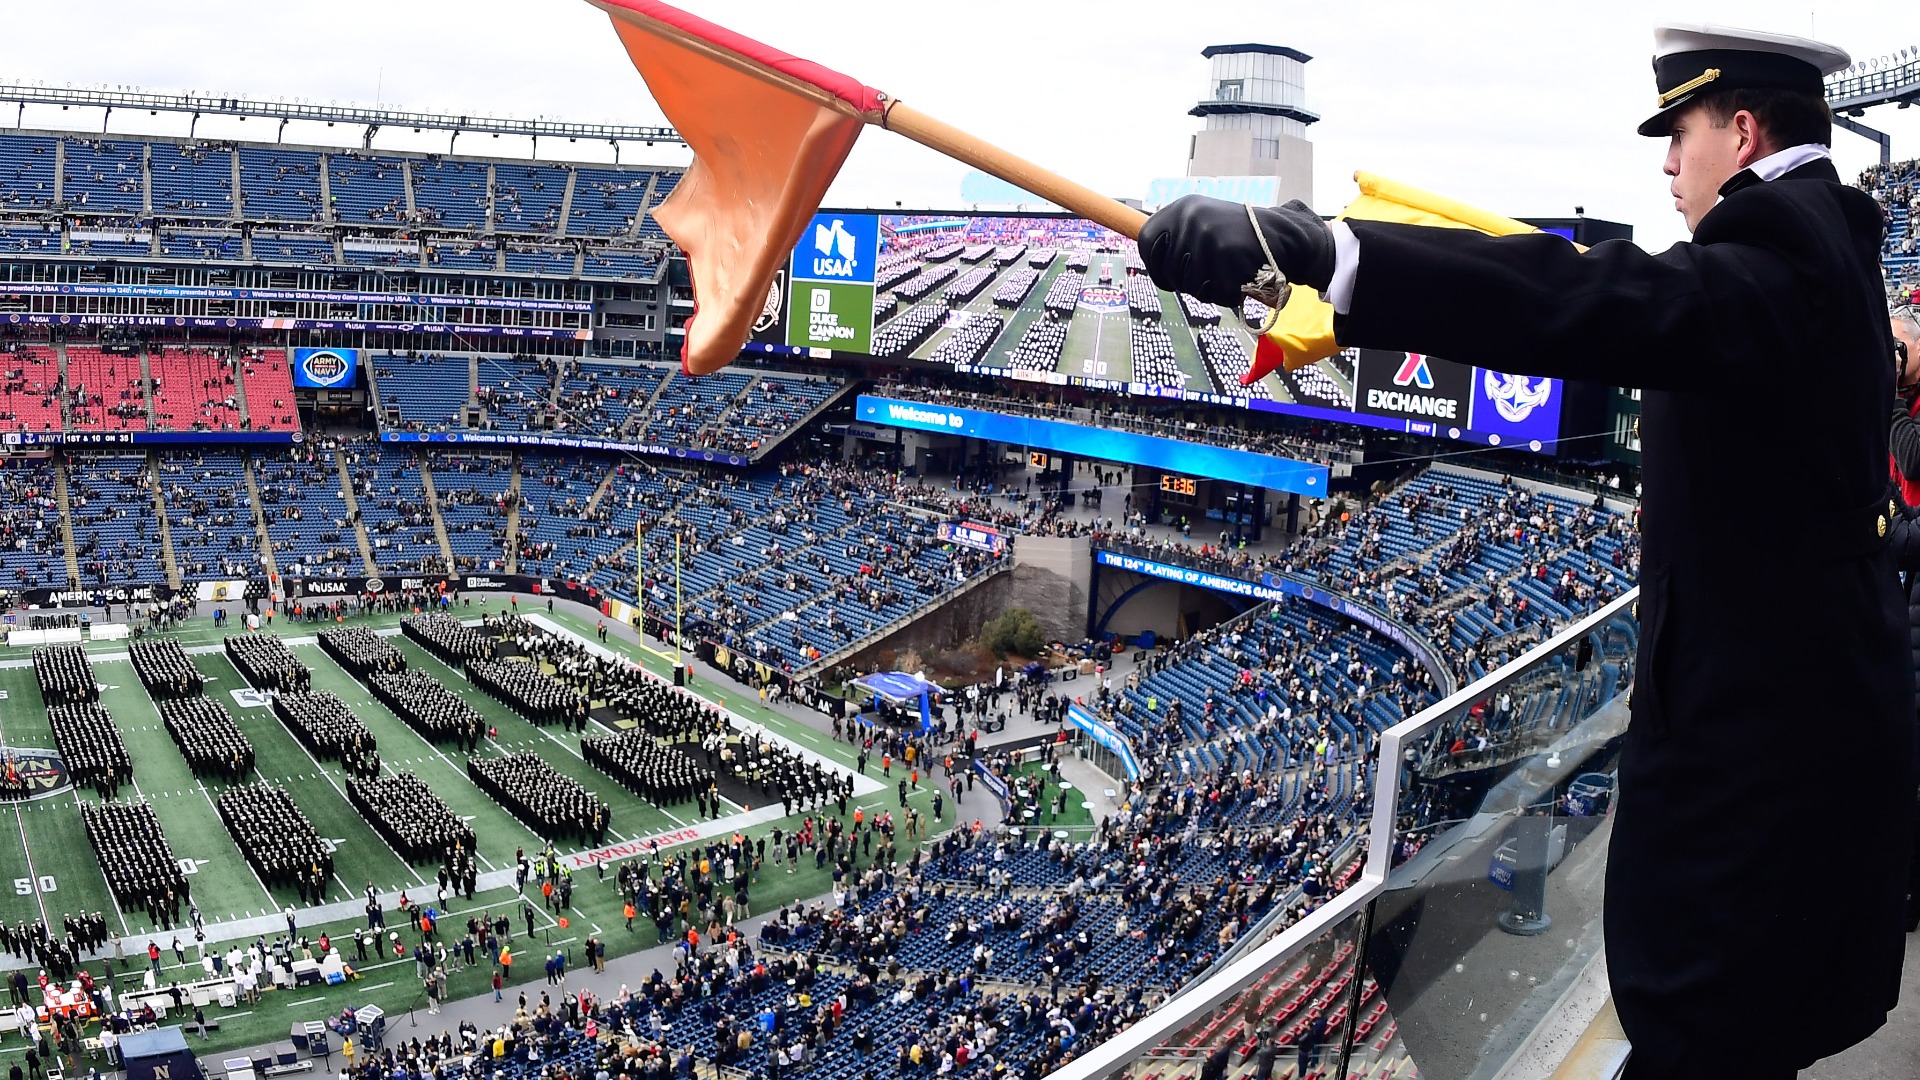 Check Out Sights, Sounds From Army-Navy At Gillette Stadium